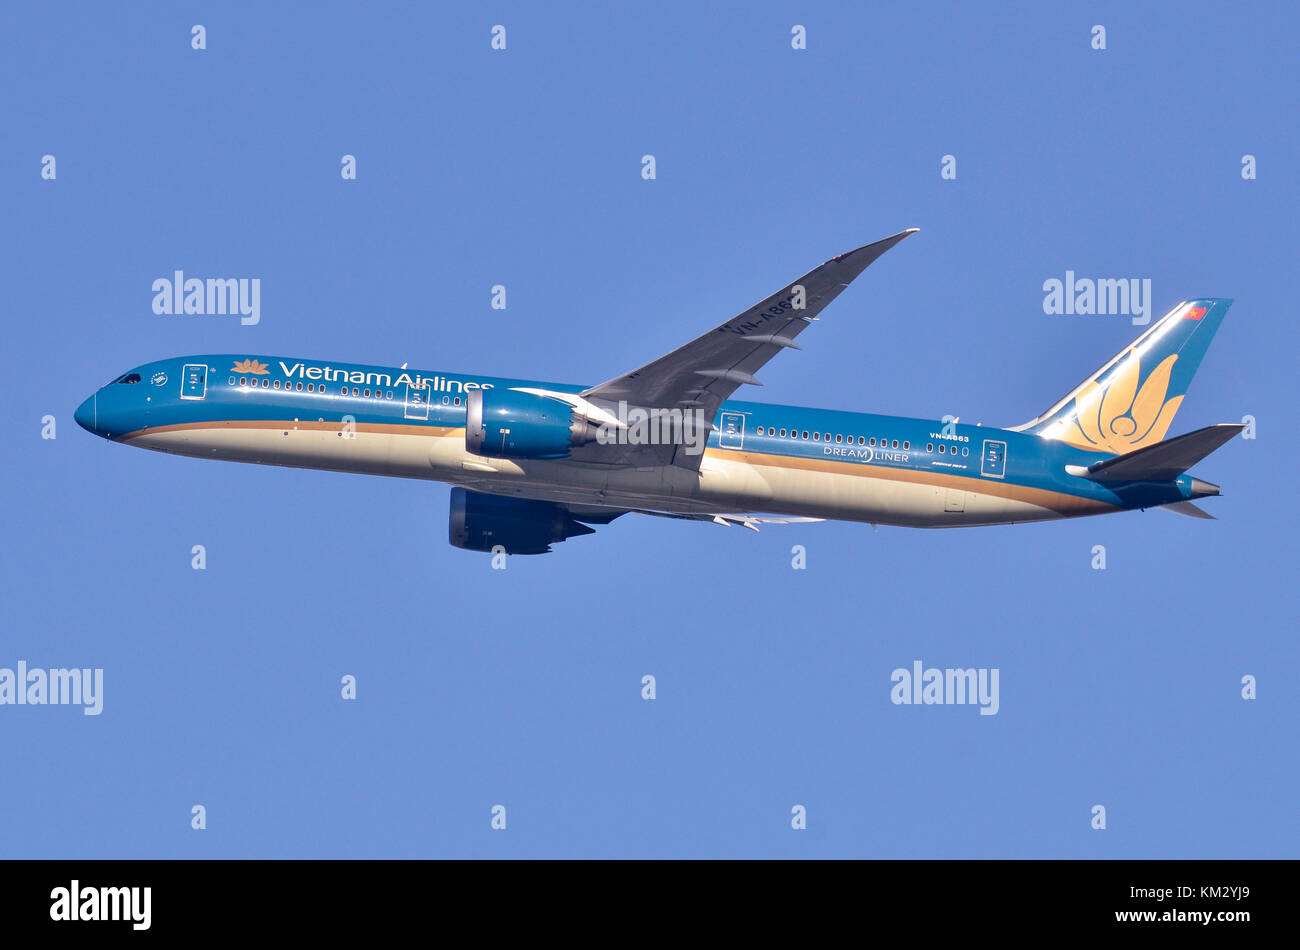 Vietnam Airlines Boeing 787-9 Dreamliner, Heathrow Airport, UK. Boeing 787-9 VN-A863 is seen departing after take-off. Stock Photo